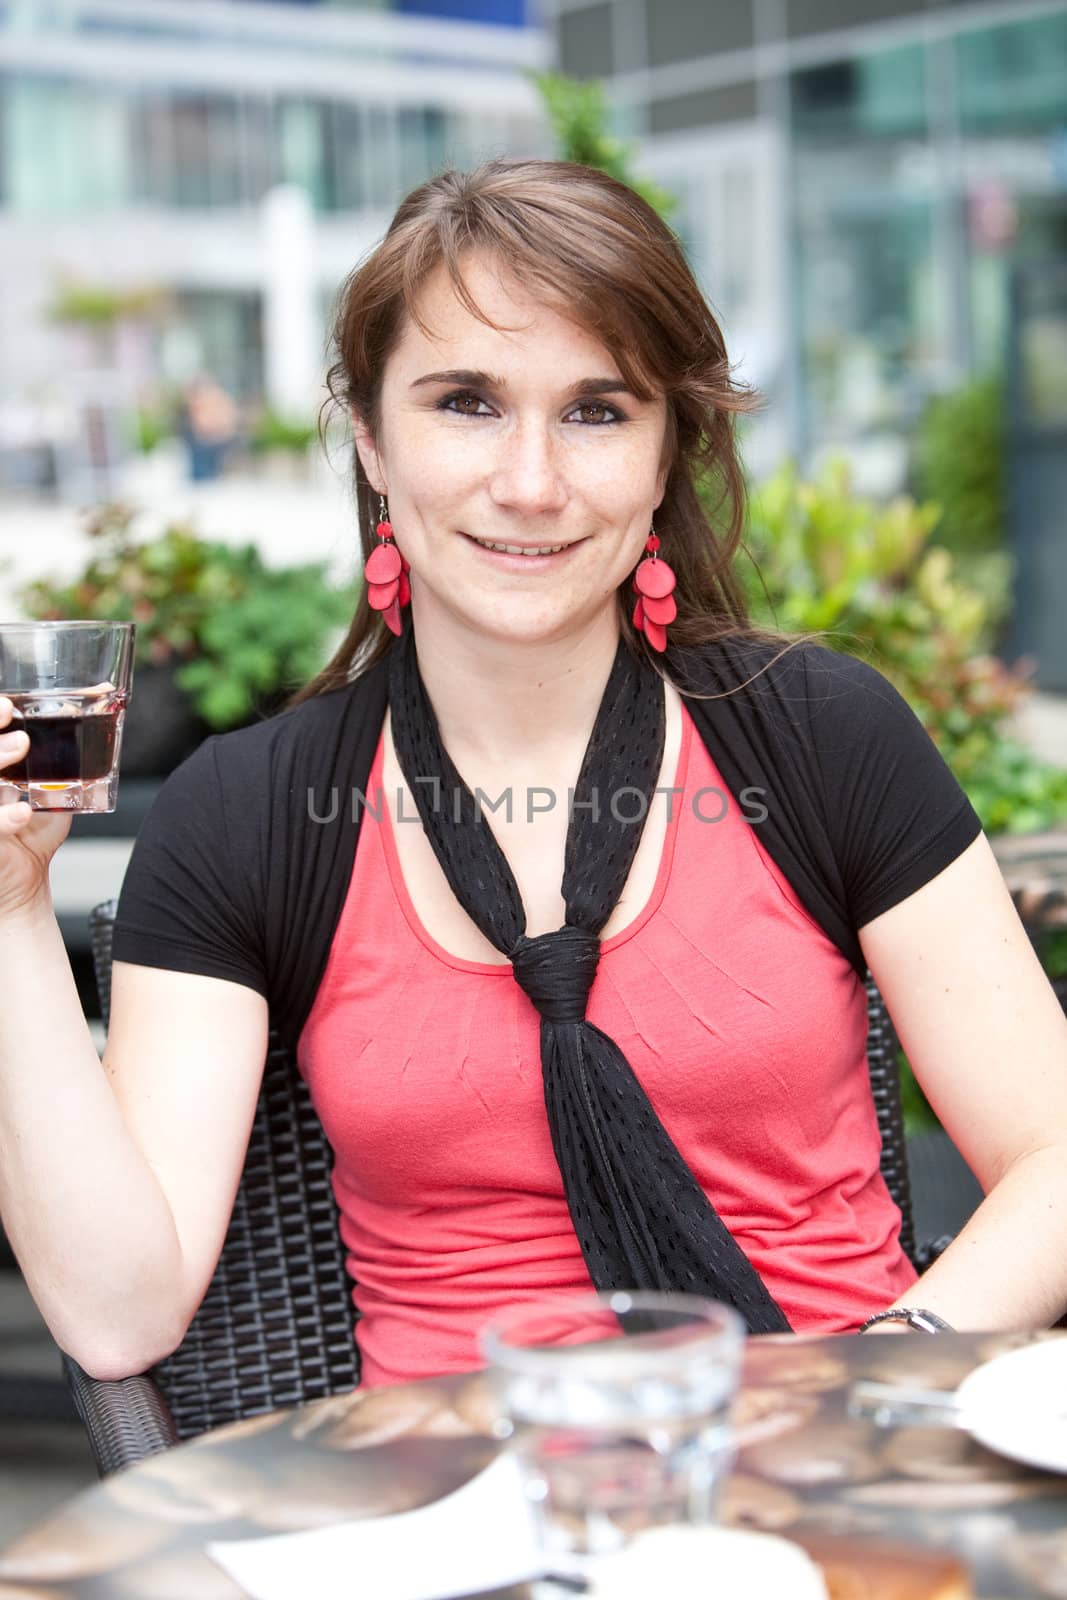 Pretty young girl sitting outdoors having a drink on a terrace